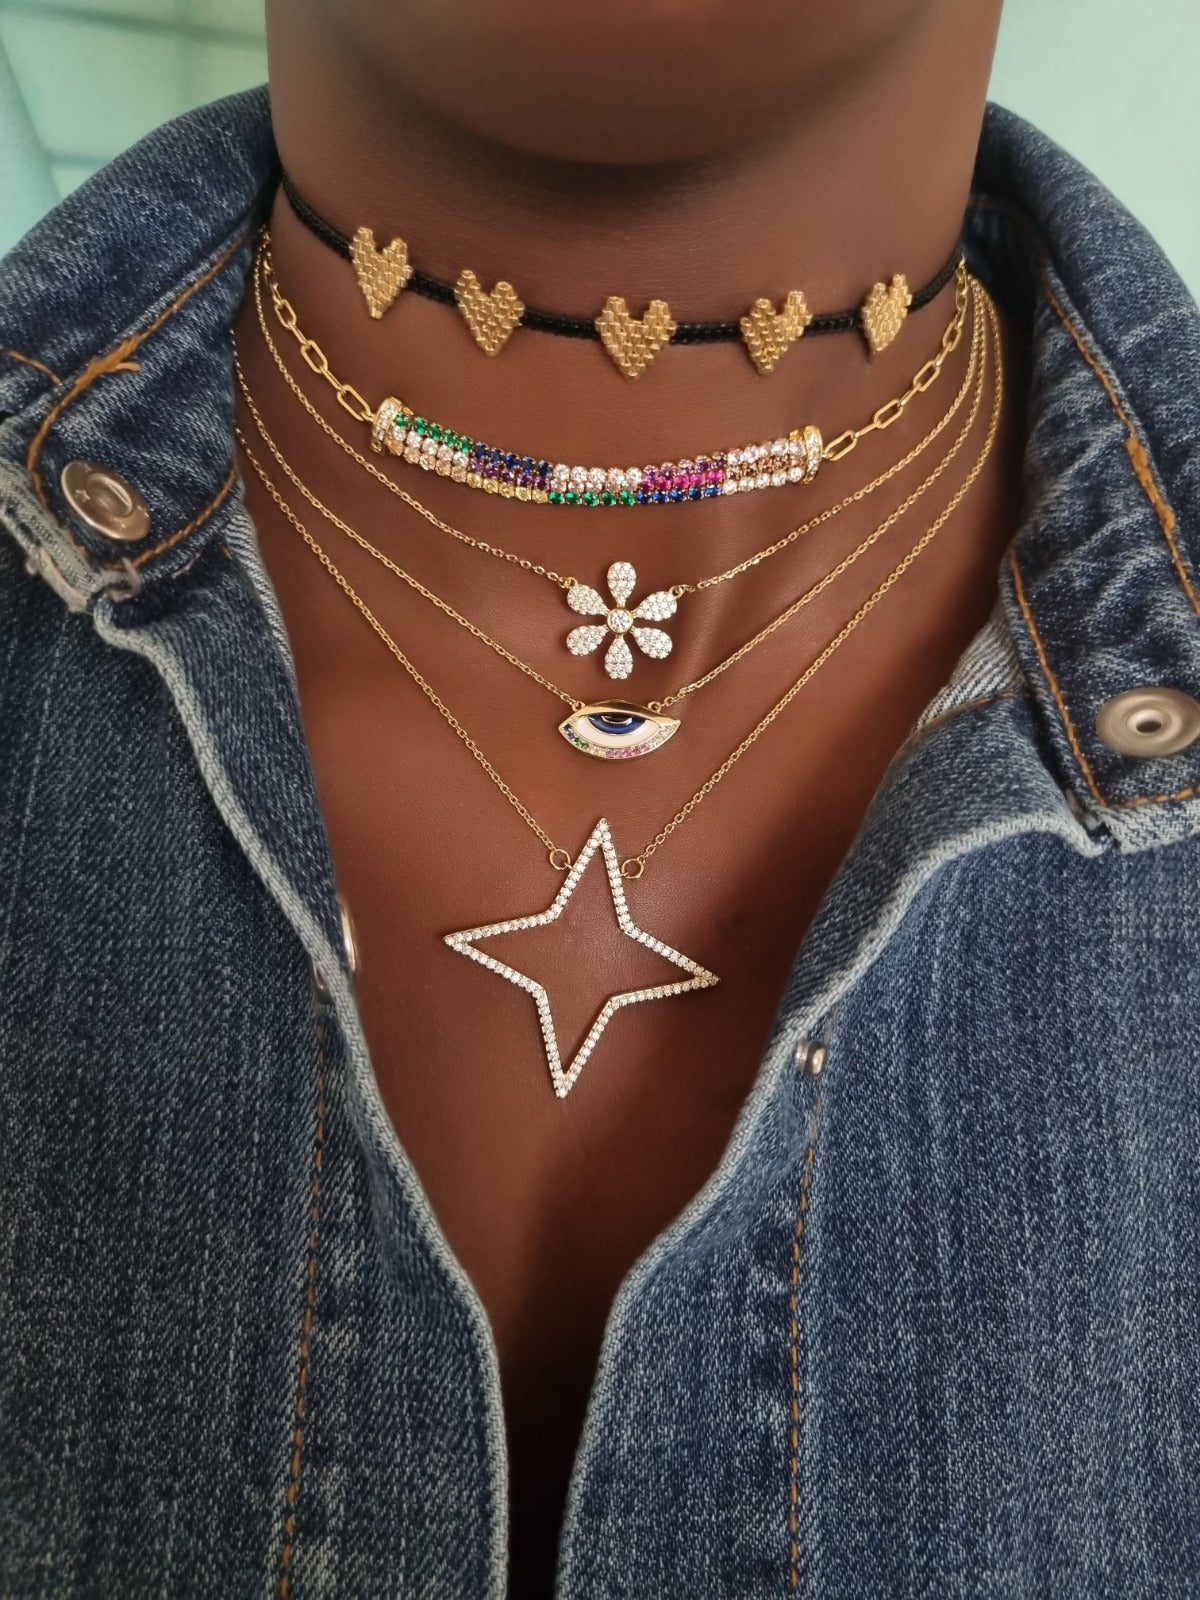 My Flower Casual Necklace